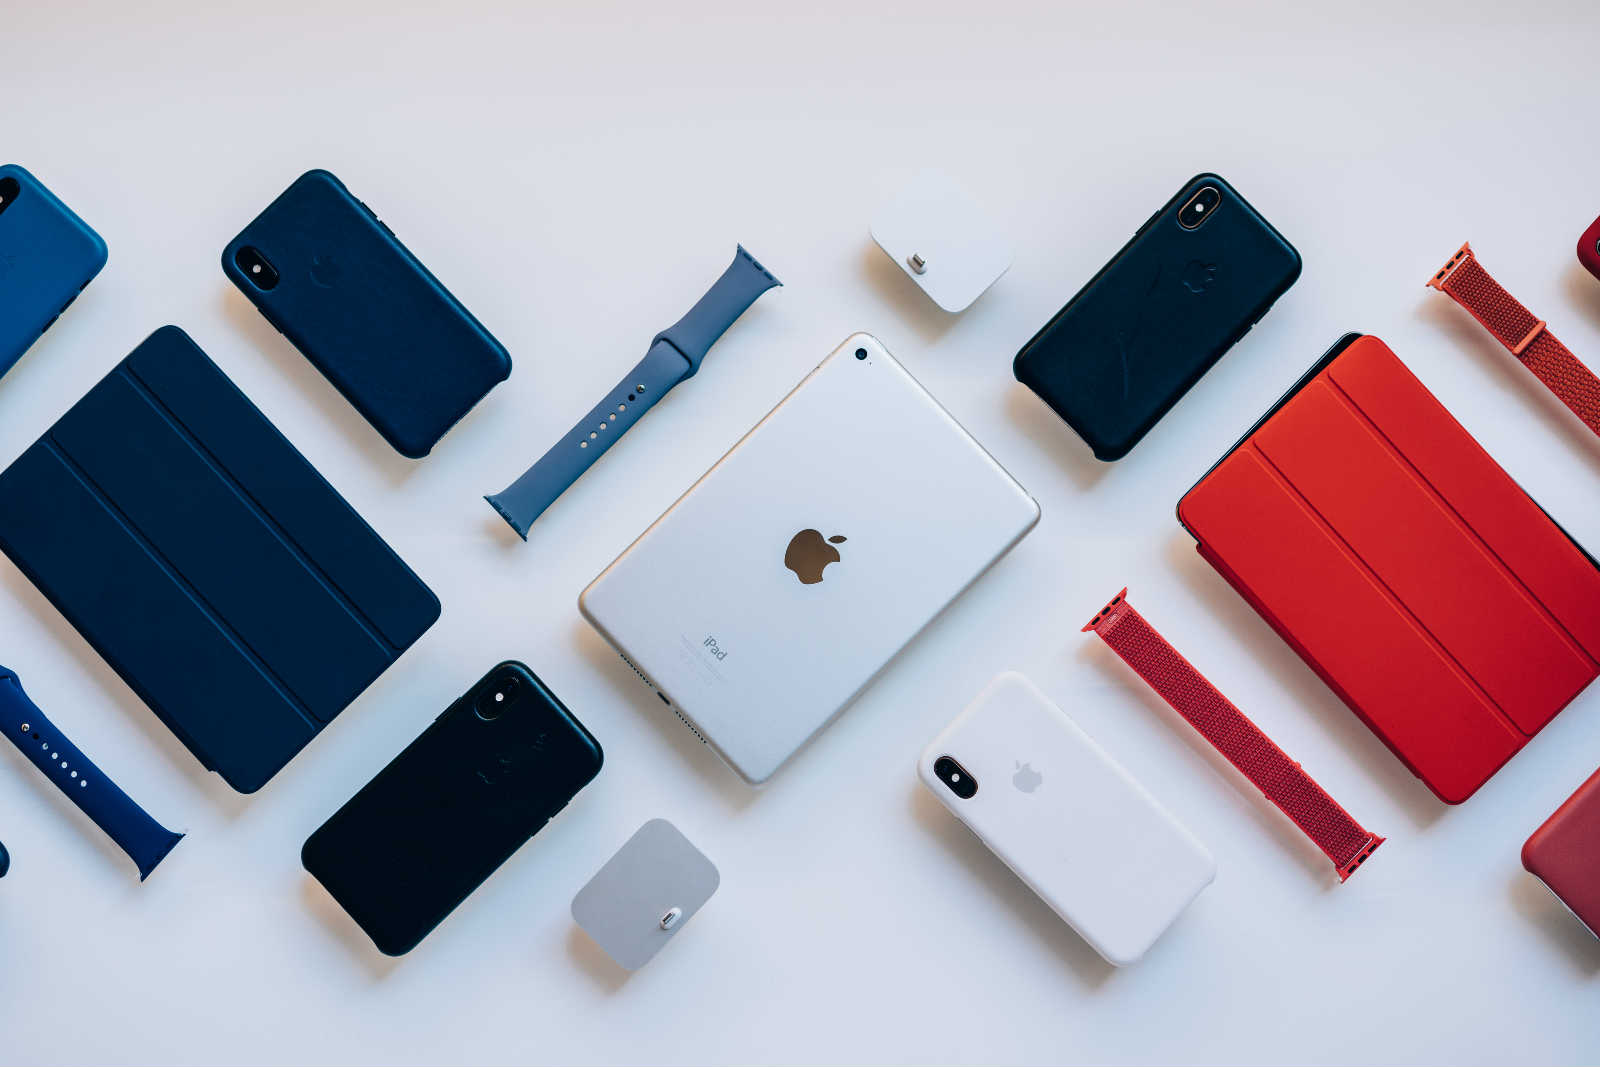 Top 5 New Apple Products Worth Looking Forward to in 2020 - ESR Blog